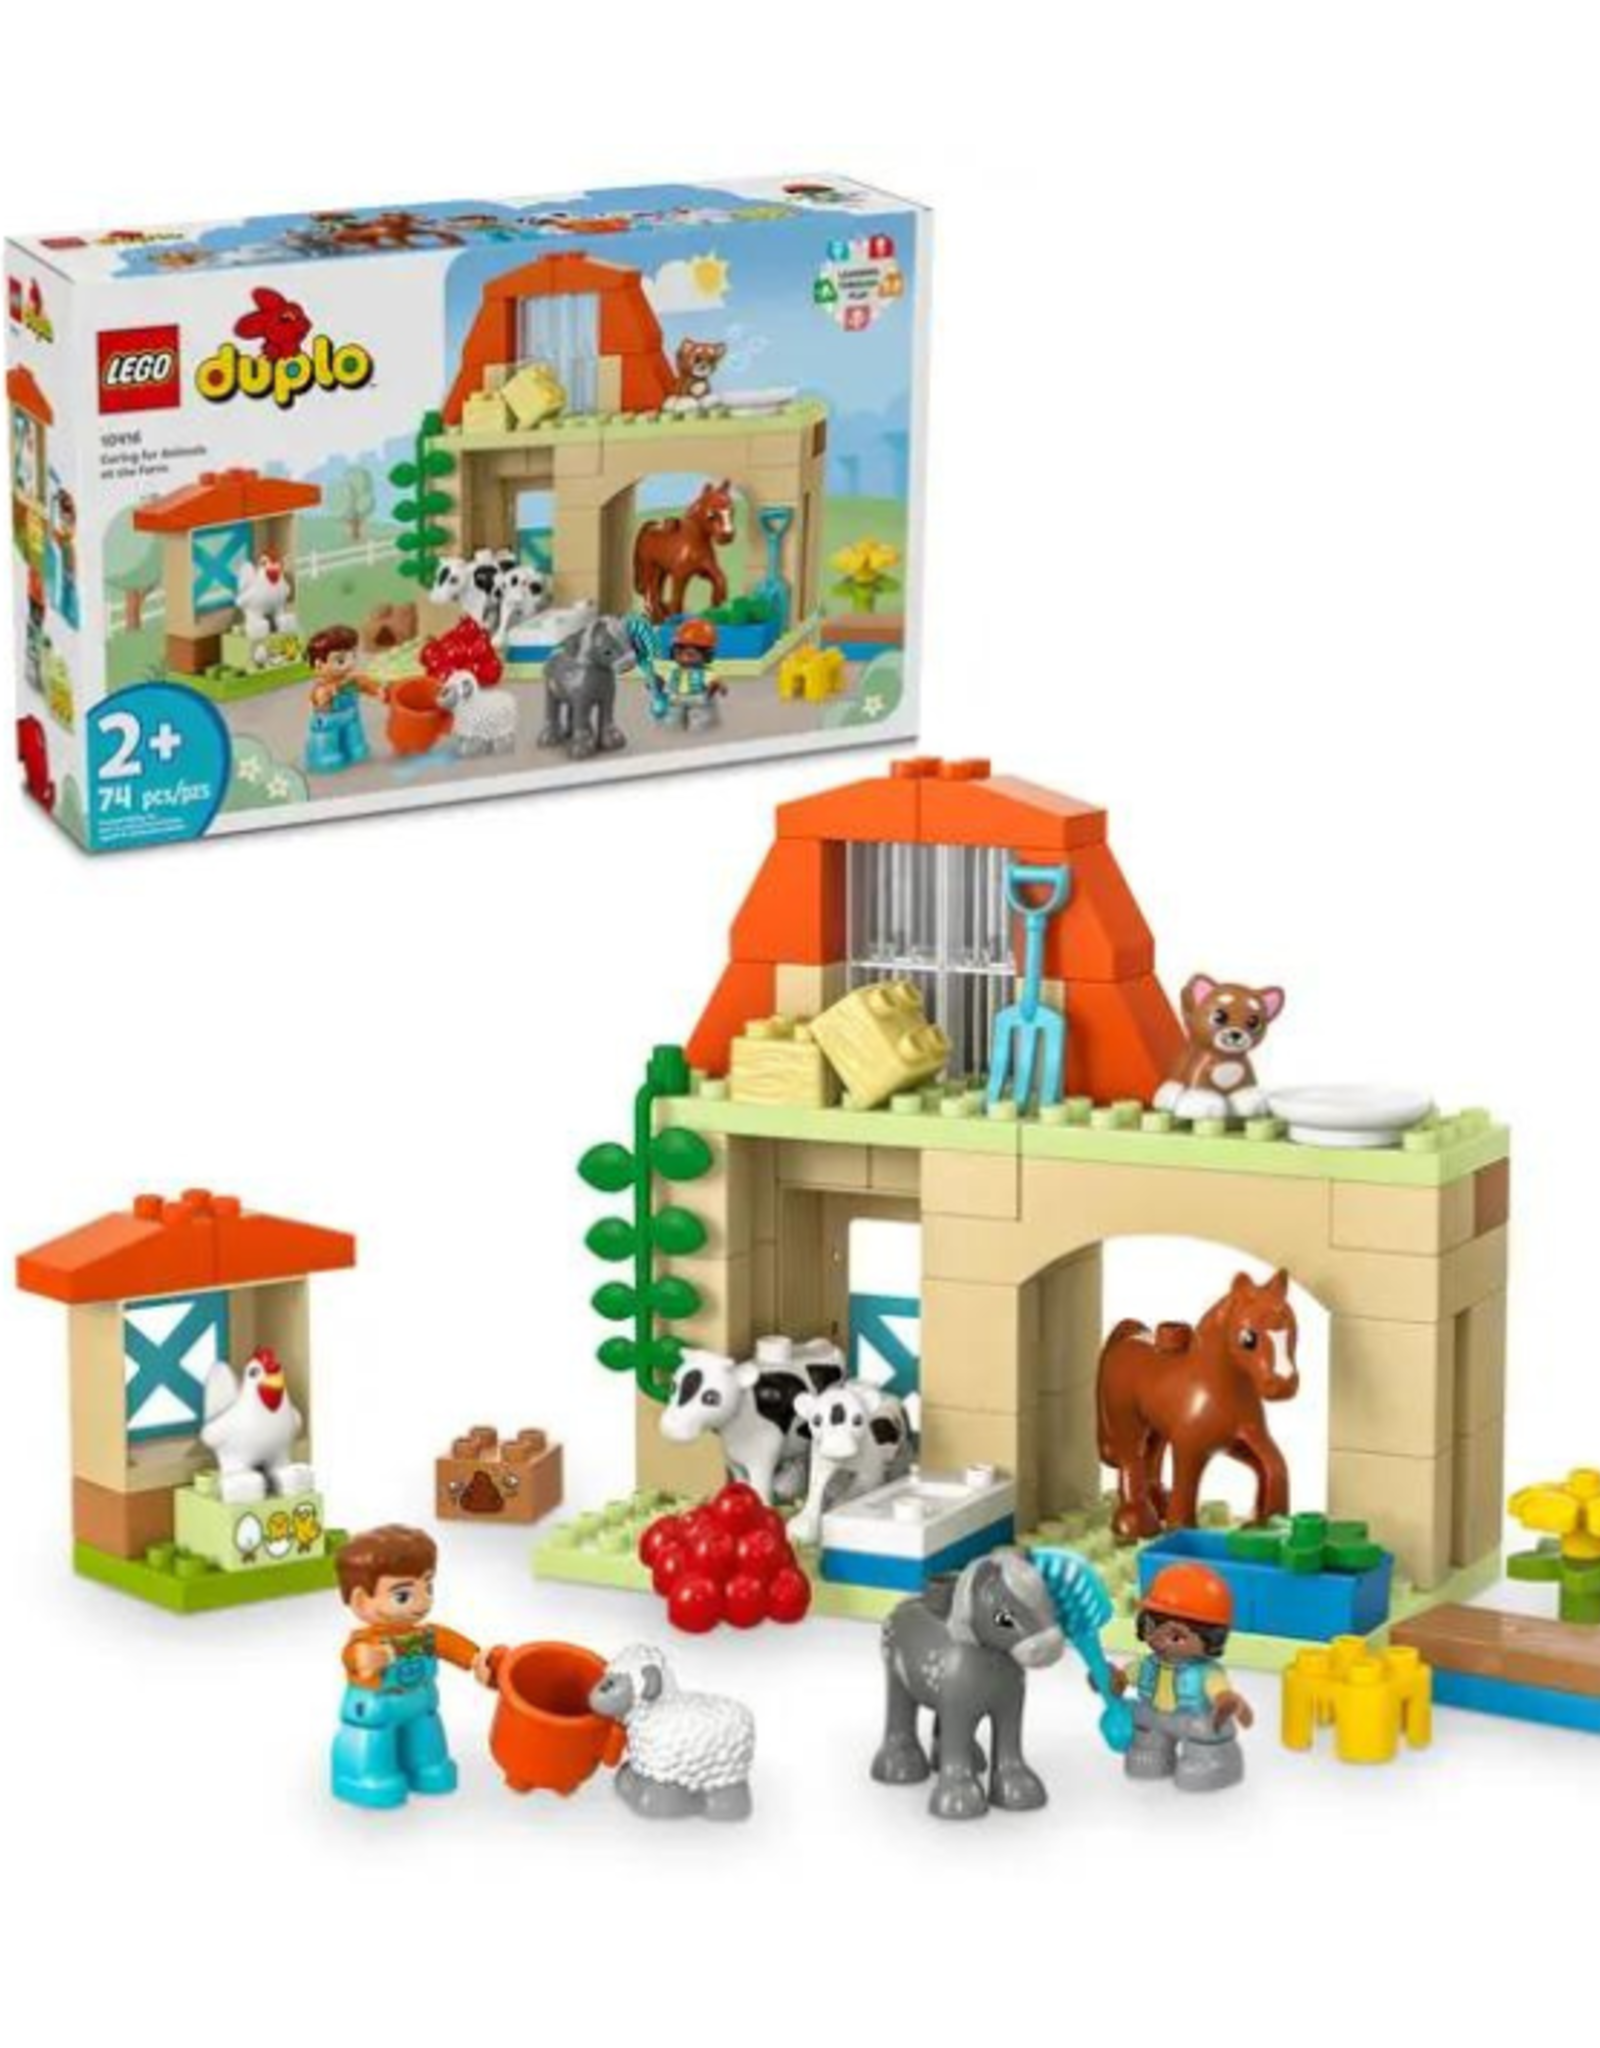 Lego - Duplo - 10416 - Caring for Animals at the Farm -  -  Westmans Local Toy Store